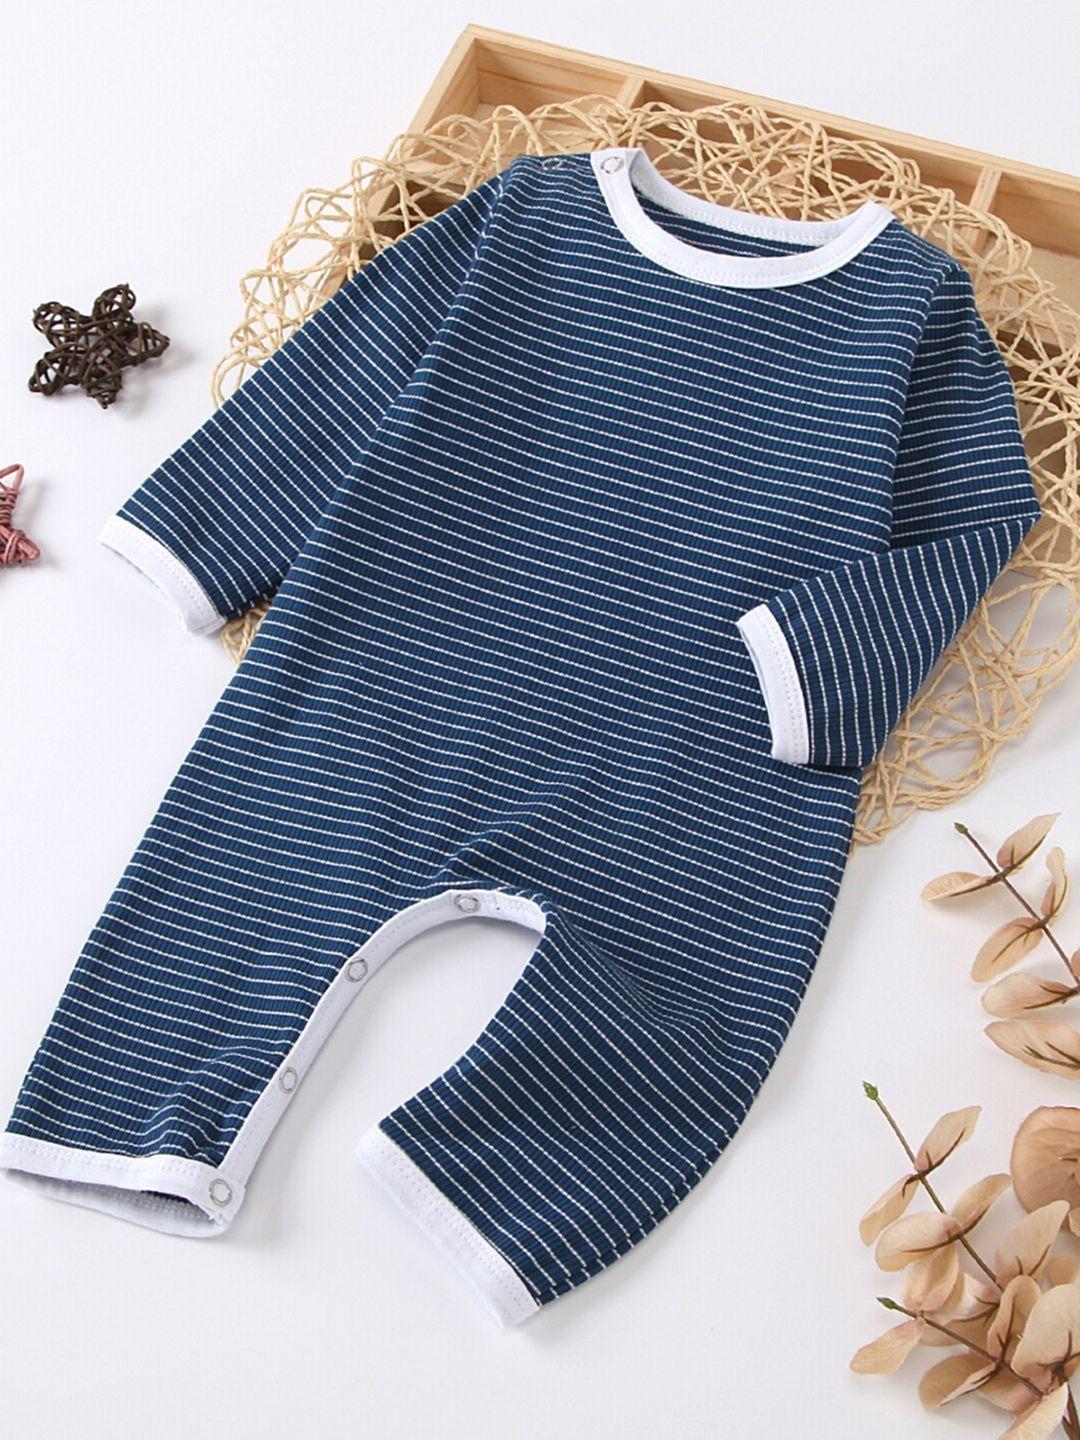 stylecast girls striped cotton rompers